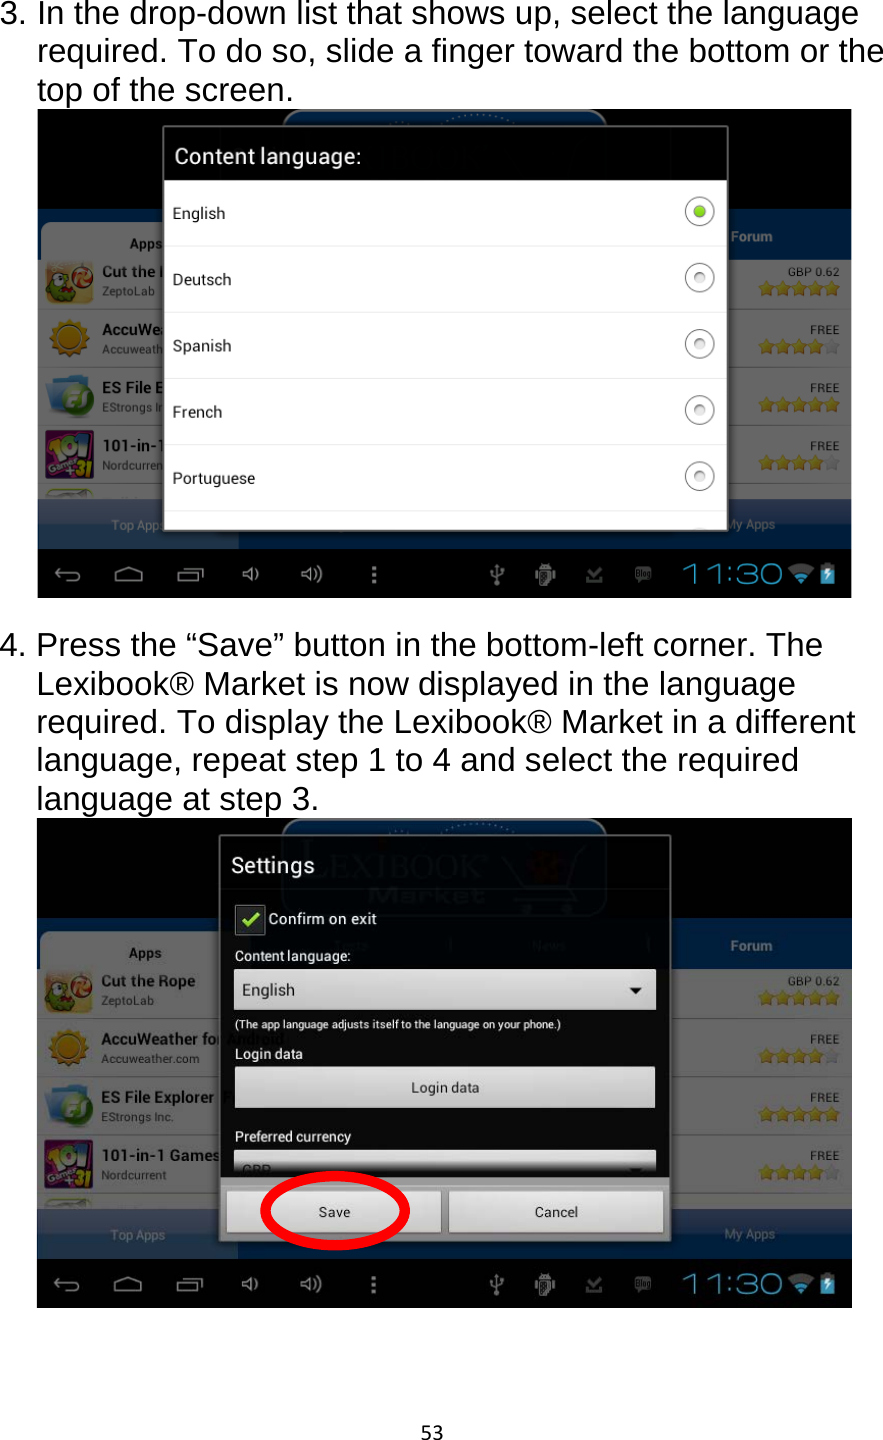 53  3. In the drop-down list that shows up, select the language required. To do so, slide a finger toward the bottom or the top of the screen.   4. Press the “Save” button in the bottom-left corner. The Lexibook® Market is now displayed in the language required. To display the Lexibook® Market in a different language, repeat step 1 to 4 and select the required language at step 3.    